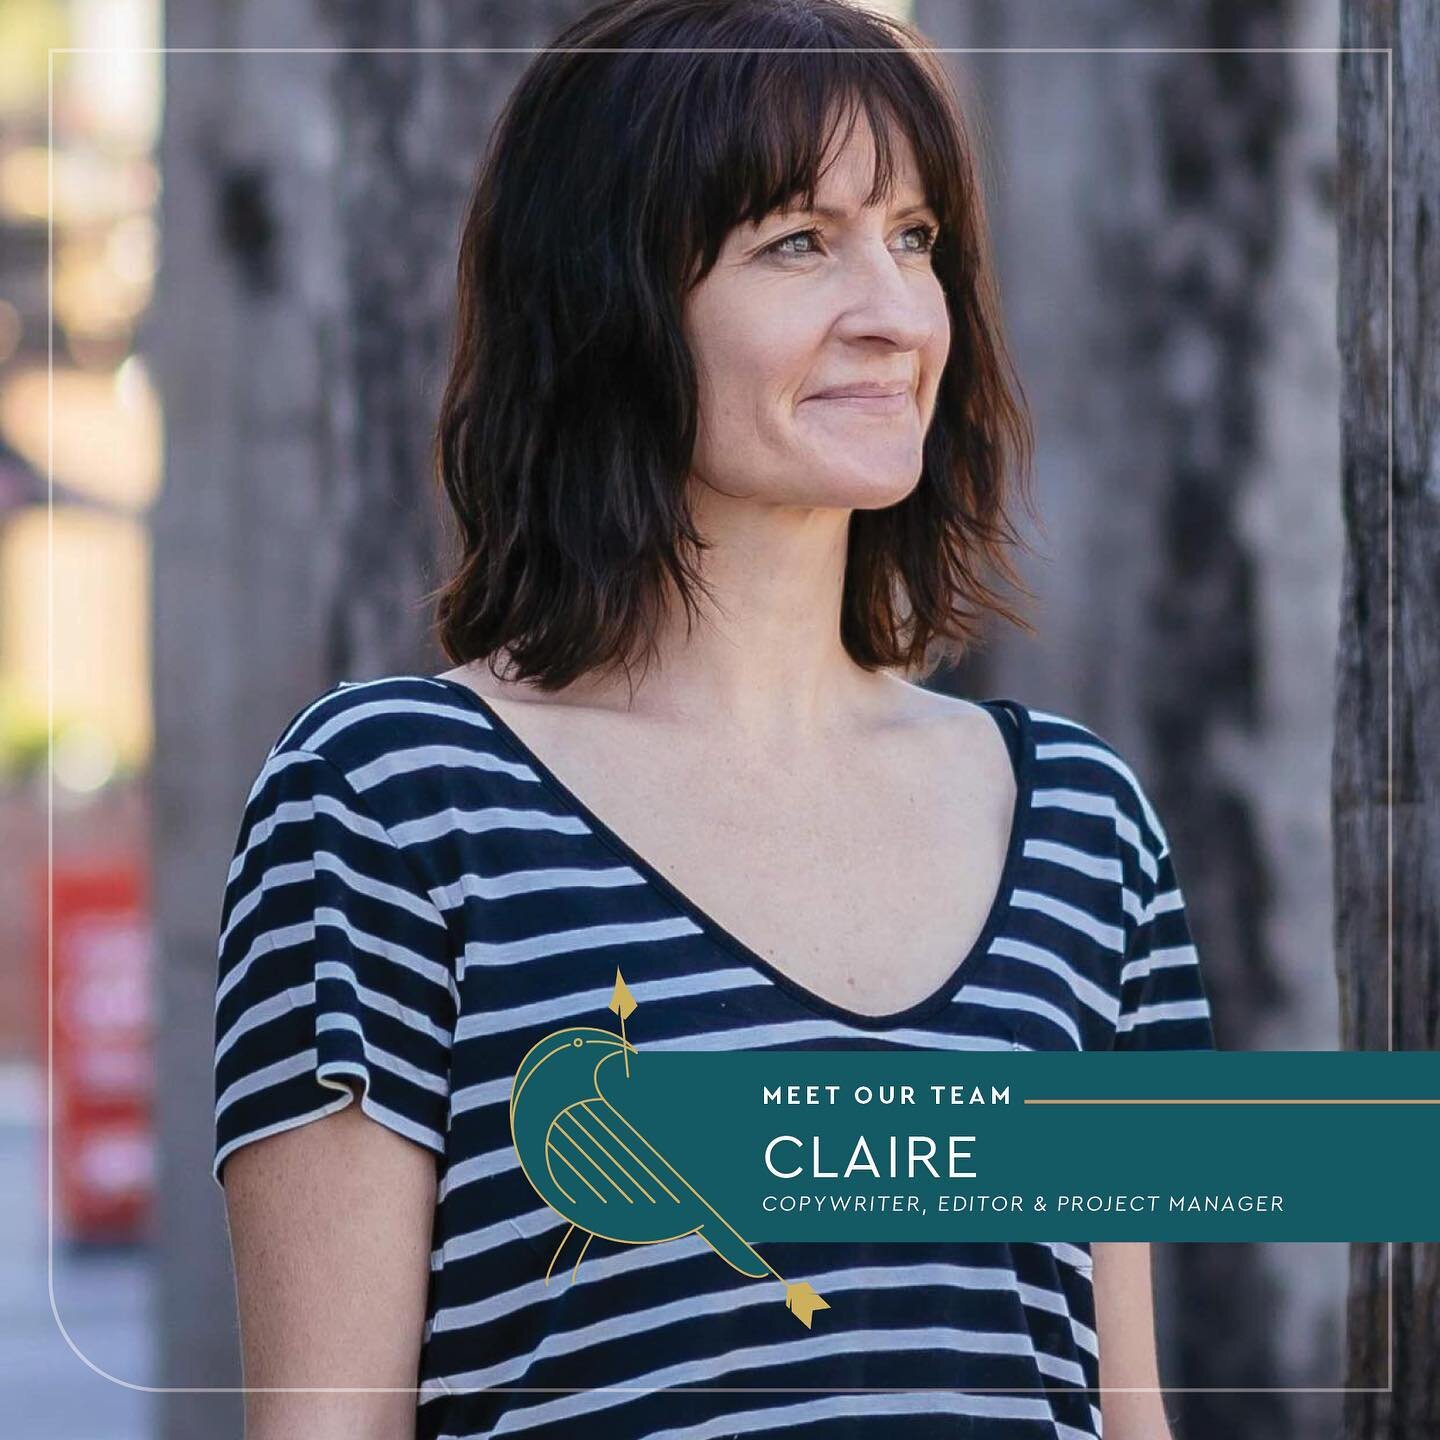 Claire is known as 'Penguin Lady' around Christchurch! And before 'Pop Up Penguins', she was previously known as 'Giraffe Lady' (Christchurch Stands Tall). But as well as project managing successful charity events in the City of Christchurch (and som